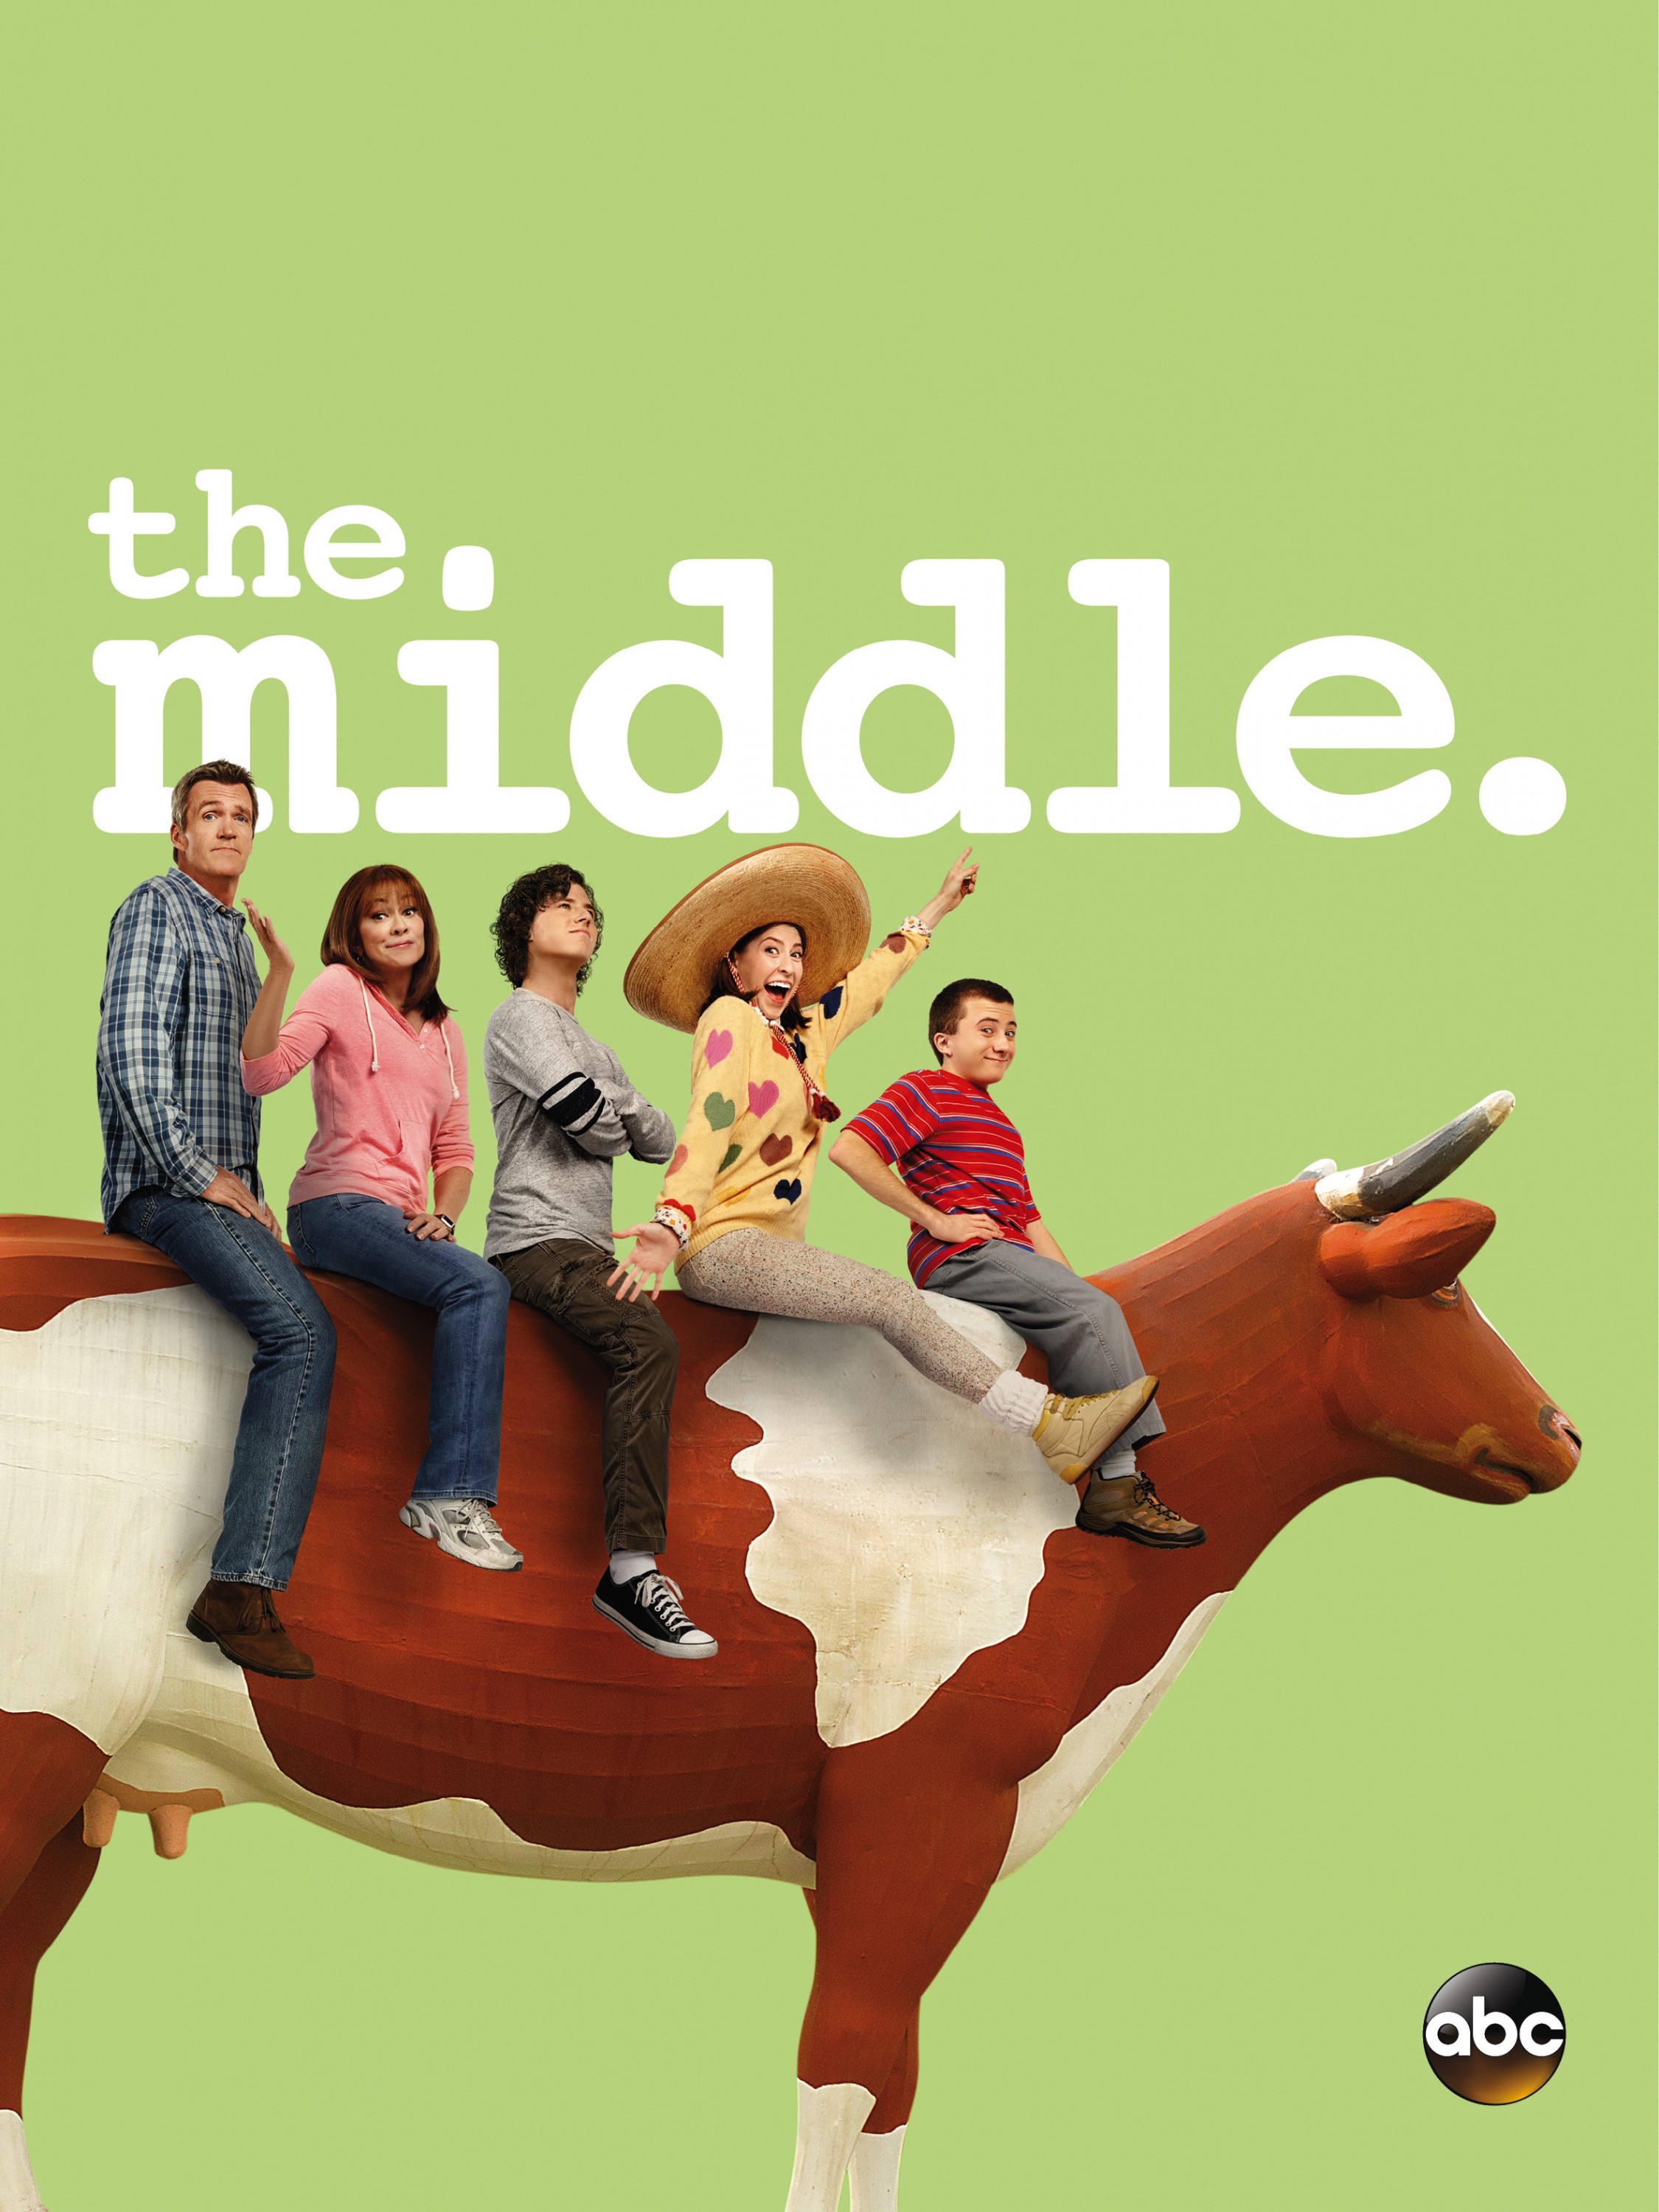 Mega Sized TV Poster Image for The Middle (#5 of 12)